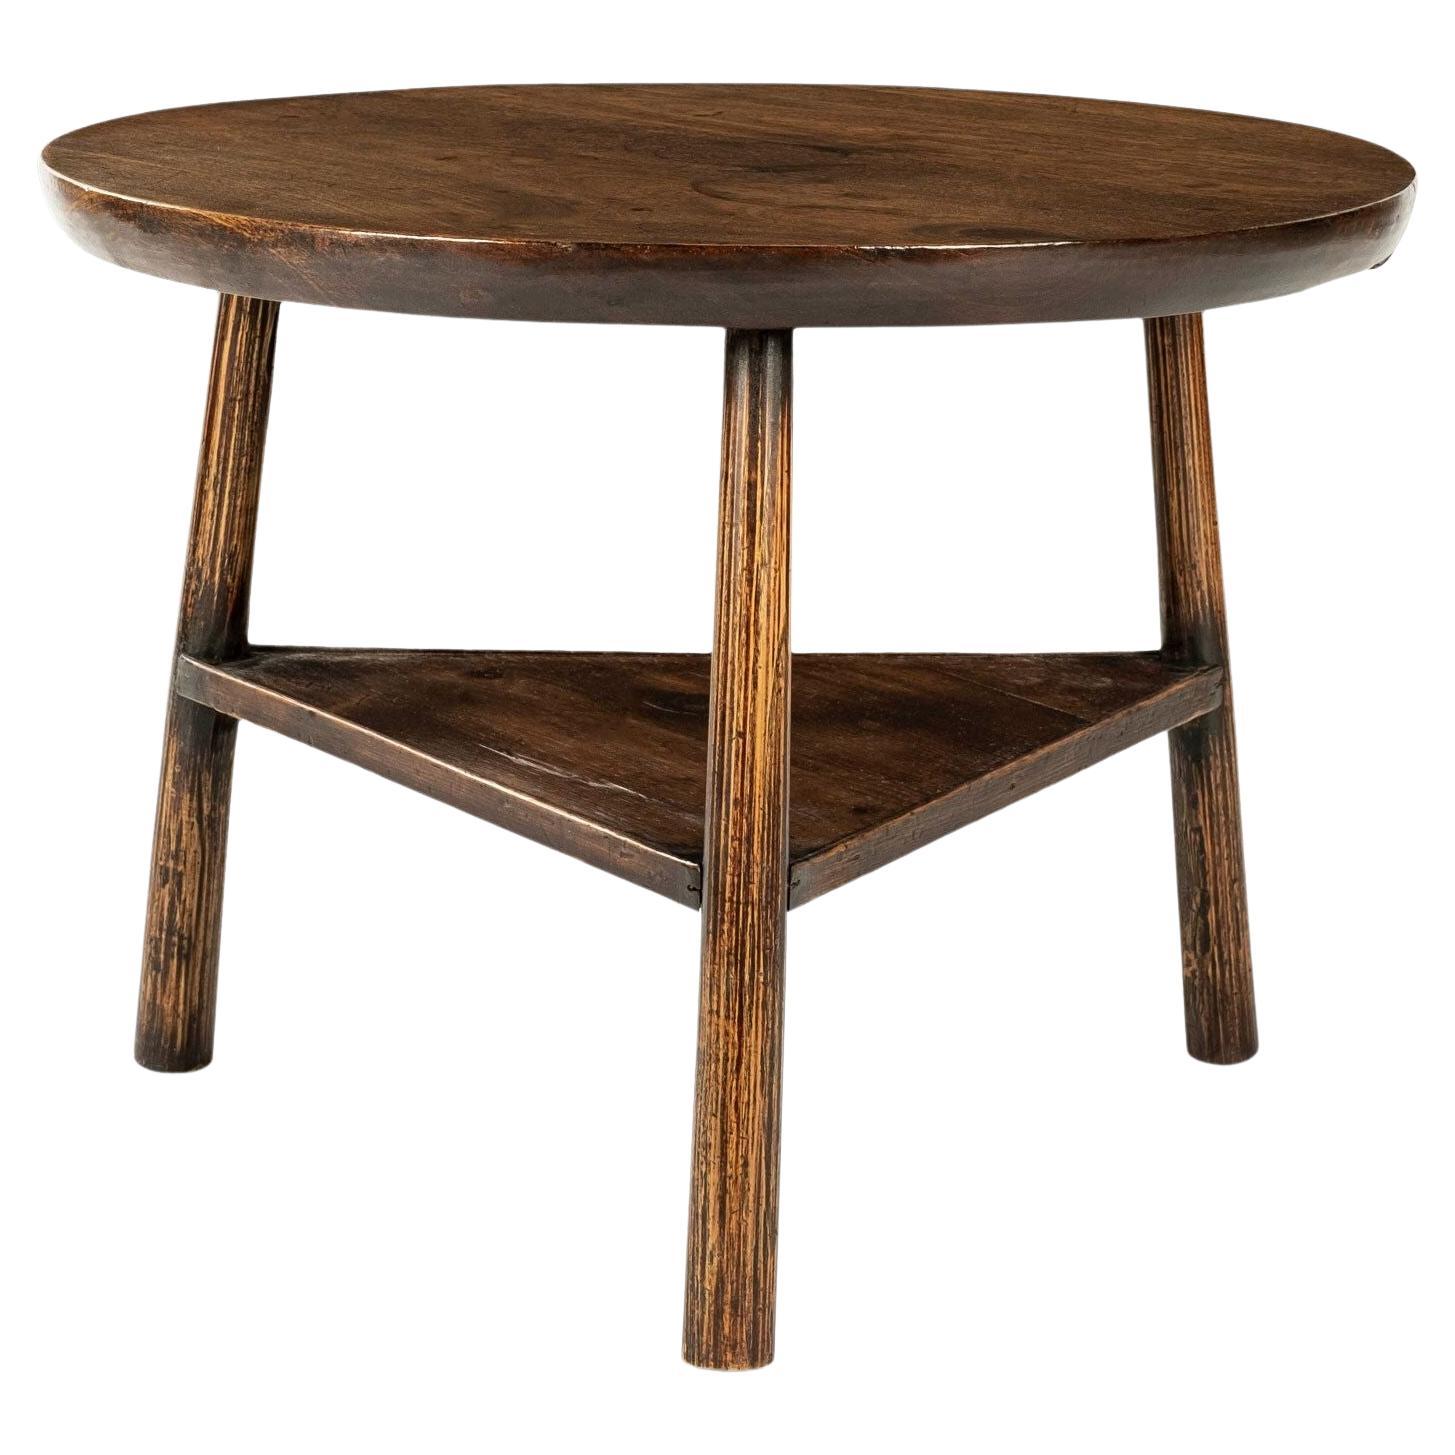 Low Cricket Table as Side Table or Small Coffee Table